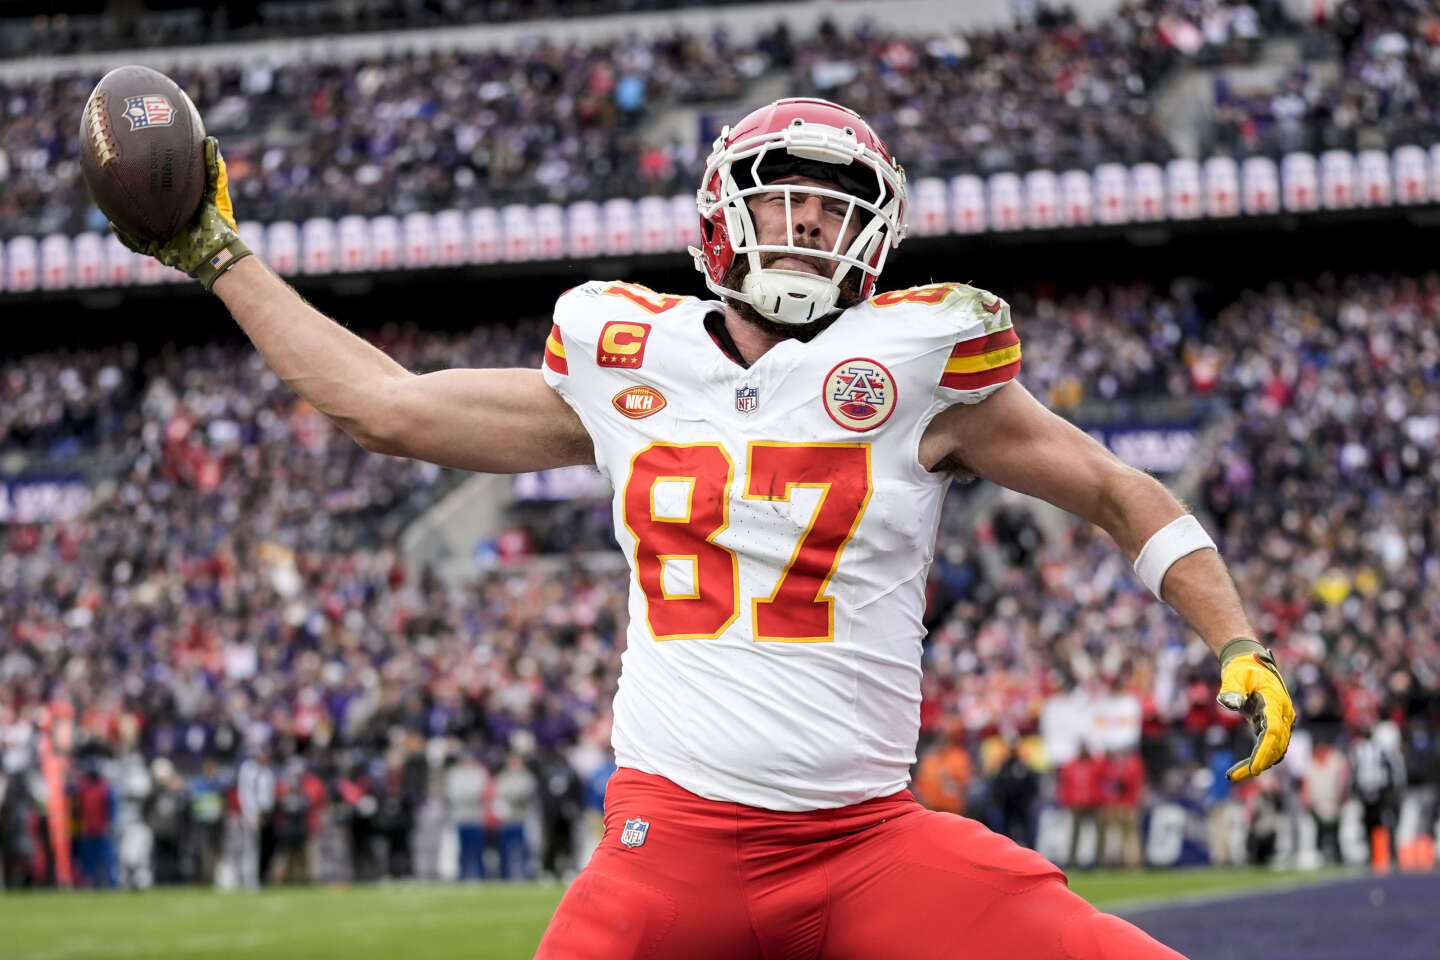  Travis Kelce is 'flooded with sponsorship offers after Super Bowl win as Taylor Swift's boyfriend weighs multimillion deals from Calvin Klein, Samsonite, Toyota and many others'